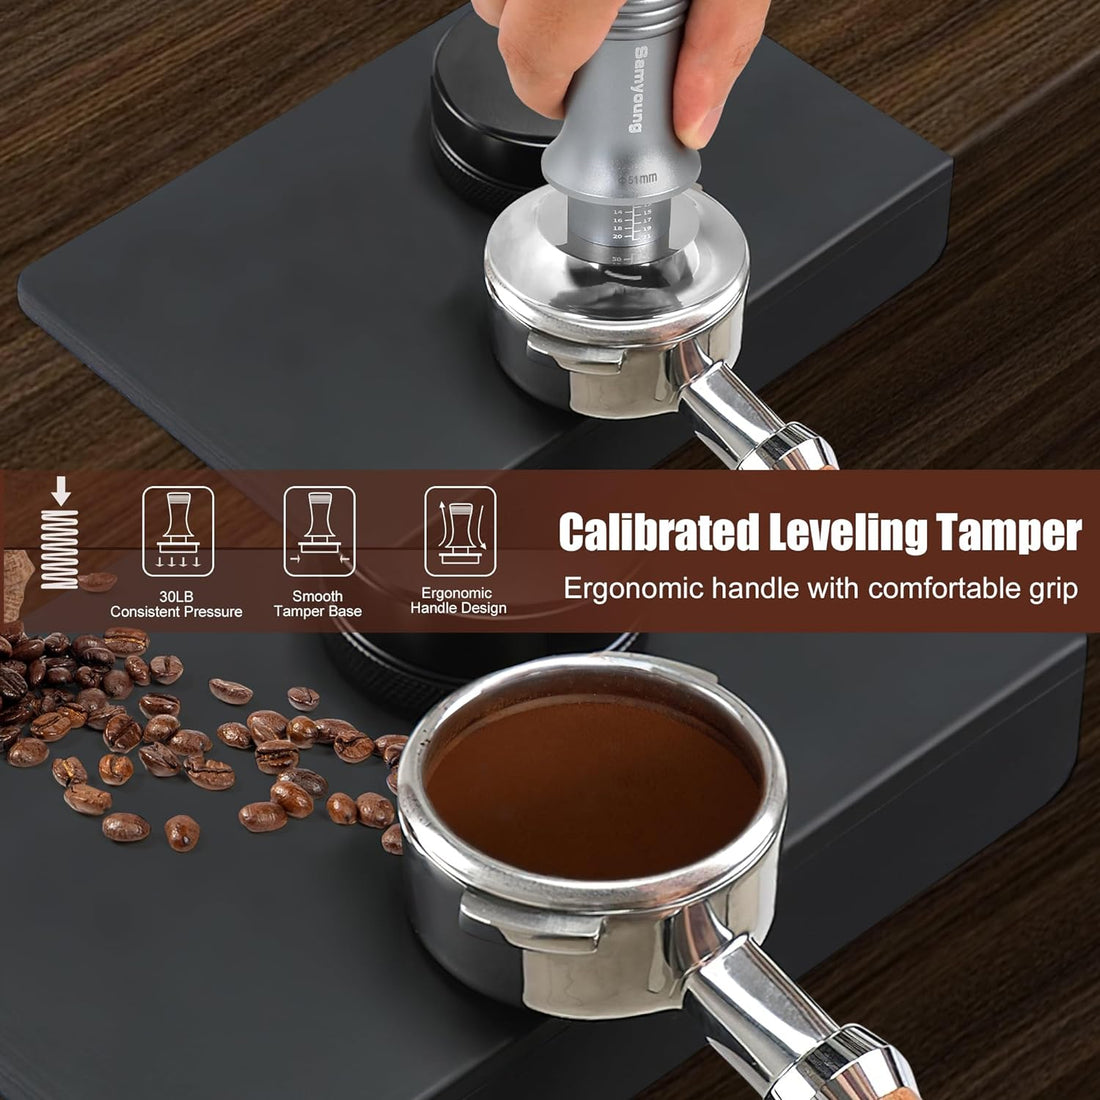 Espresso Tamper 51mm Coffee Tamper with 30lbs Calibrated Spring-loaded Stainless Steel Espresso Coffee Tamper Flat Base Fits for Barista Coffee Lover Espresso Machine (51mm)